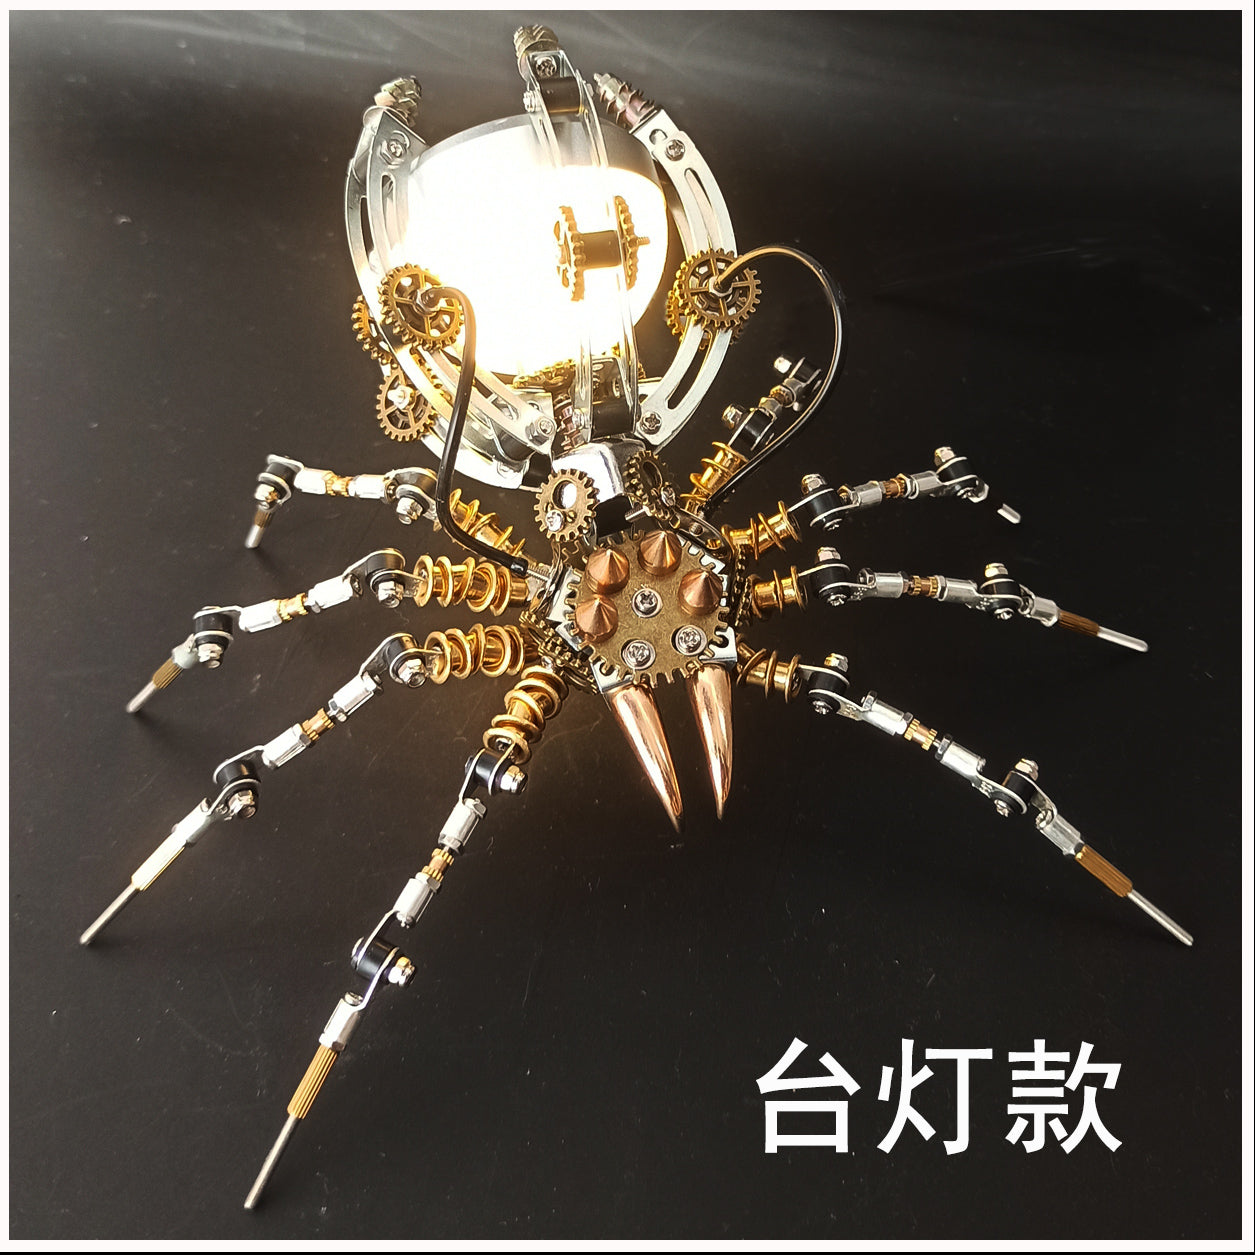 3D Mechanical Spiders